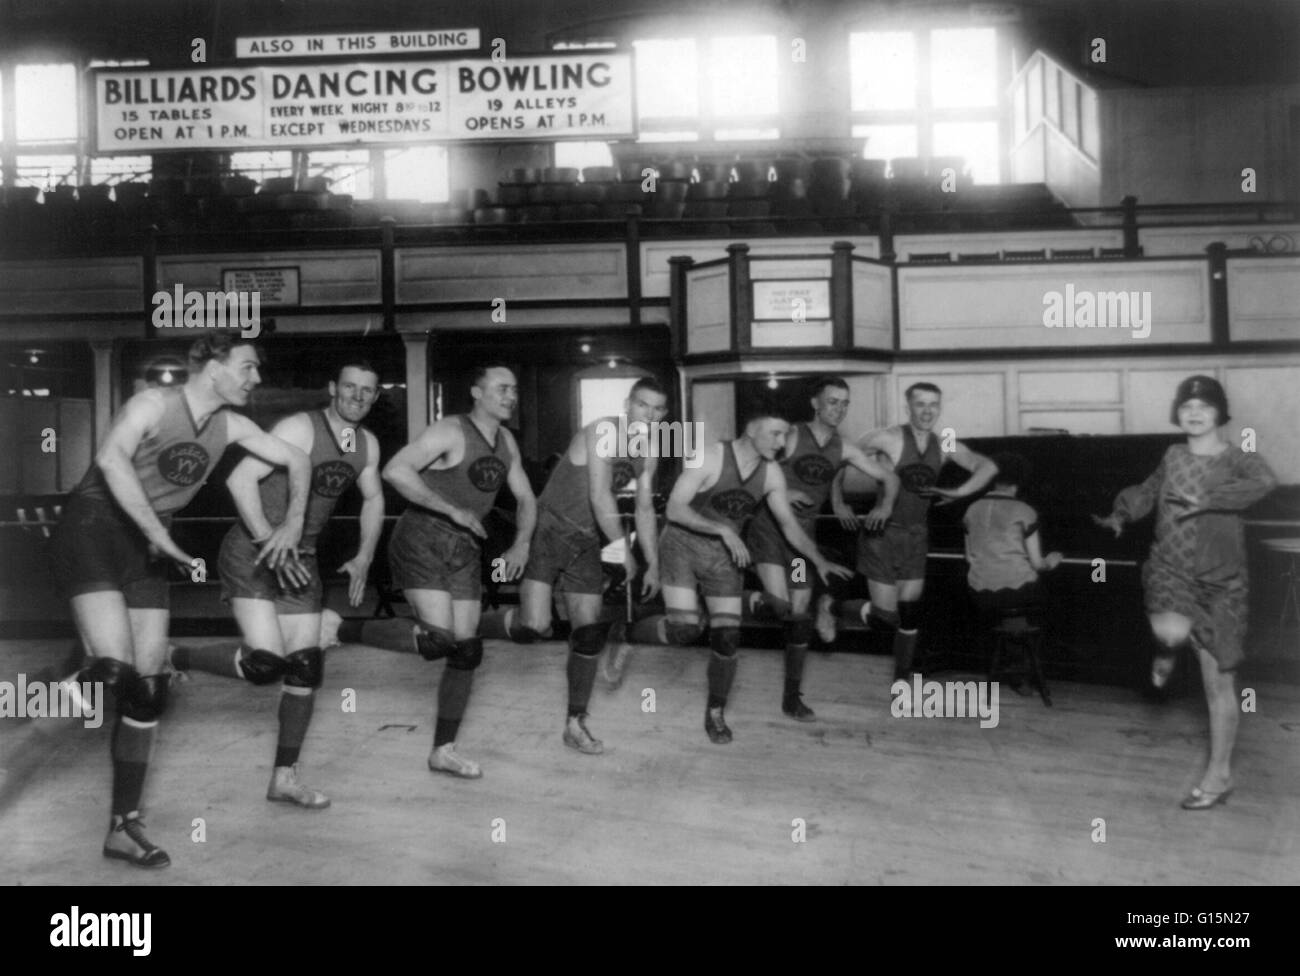 Vivian Marinelli giving dance lessons to members of the Palace Club basketball team of Washington, D.C. The members of the team are: Jones, Conway, Grody, Saunders, Kearns, Glascoe, and Manager Kennedy, 1926. The Charleston is a dance named for the harbor Stock Photo